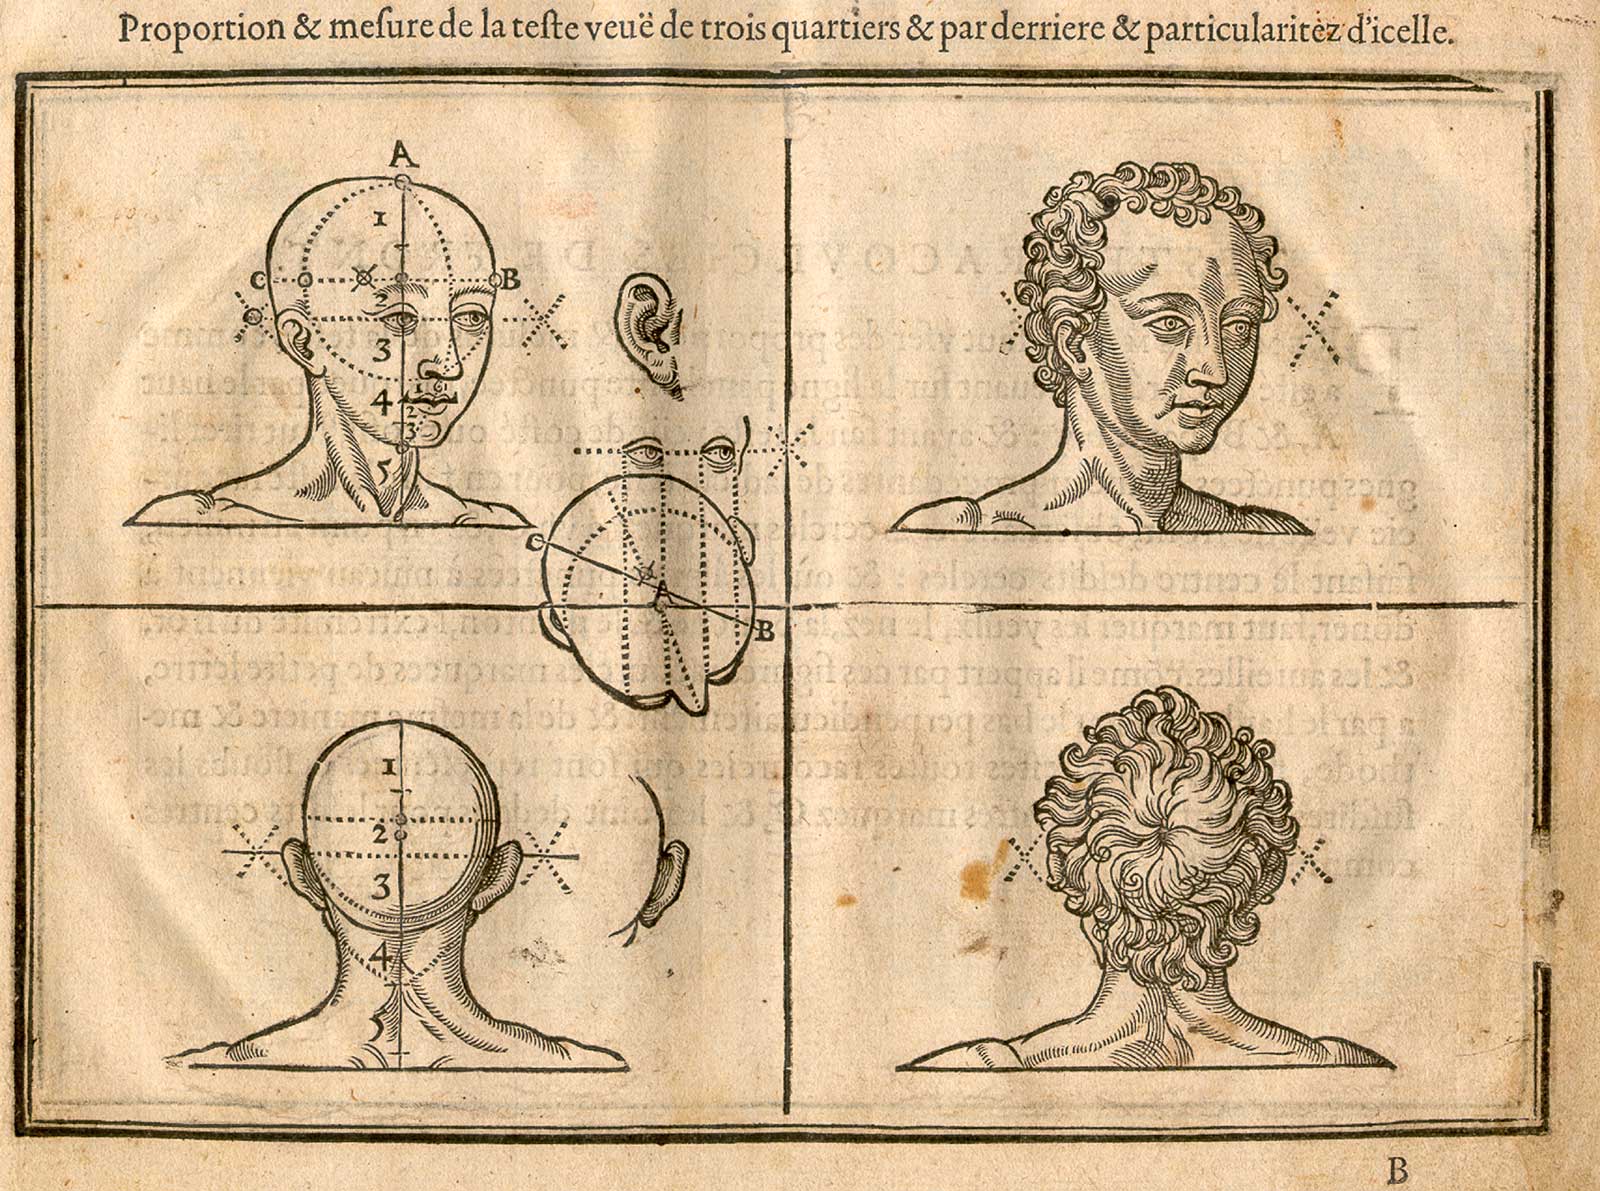 Woodcut illustration divided into four quadrants showing two male heads in the top two quadrants turned three quarters to the right with the one on the left showing proportional lines and measurements, and in the two lower quadrants two heads of the back of a man’s head with the one left showing proportional lines and measurements, from Jehan Cousin’s Livre de pourtraiture, NLM Call no.: WZ 250 C8673L 1608.